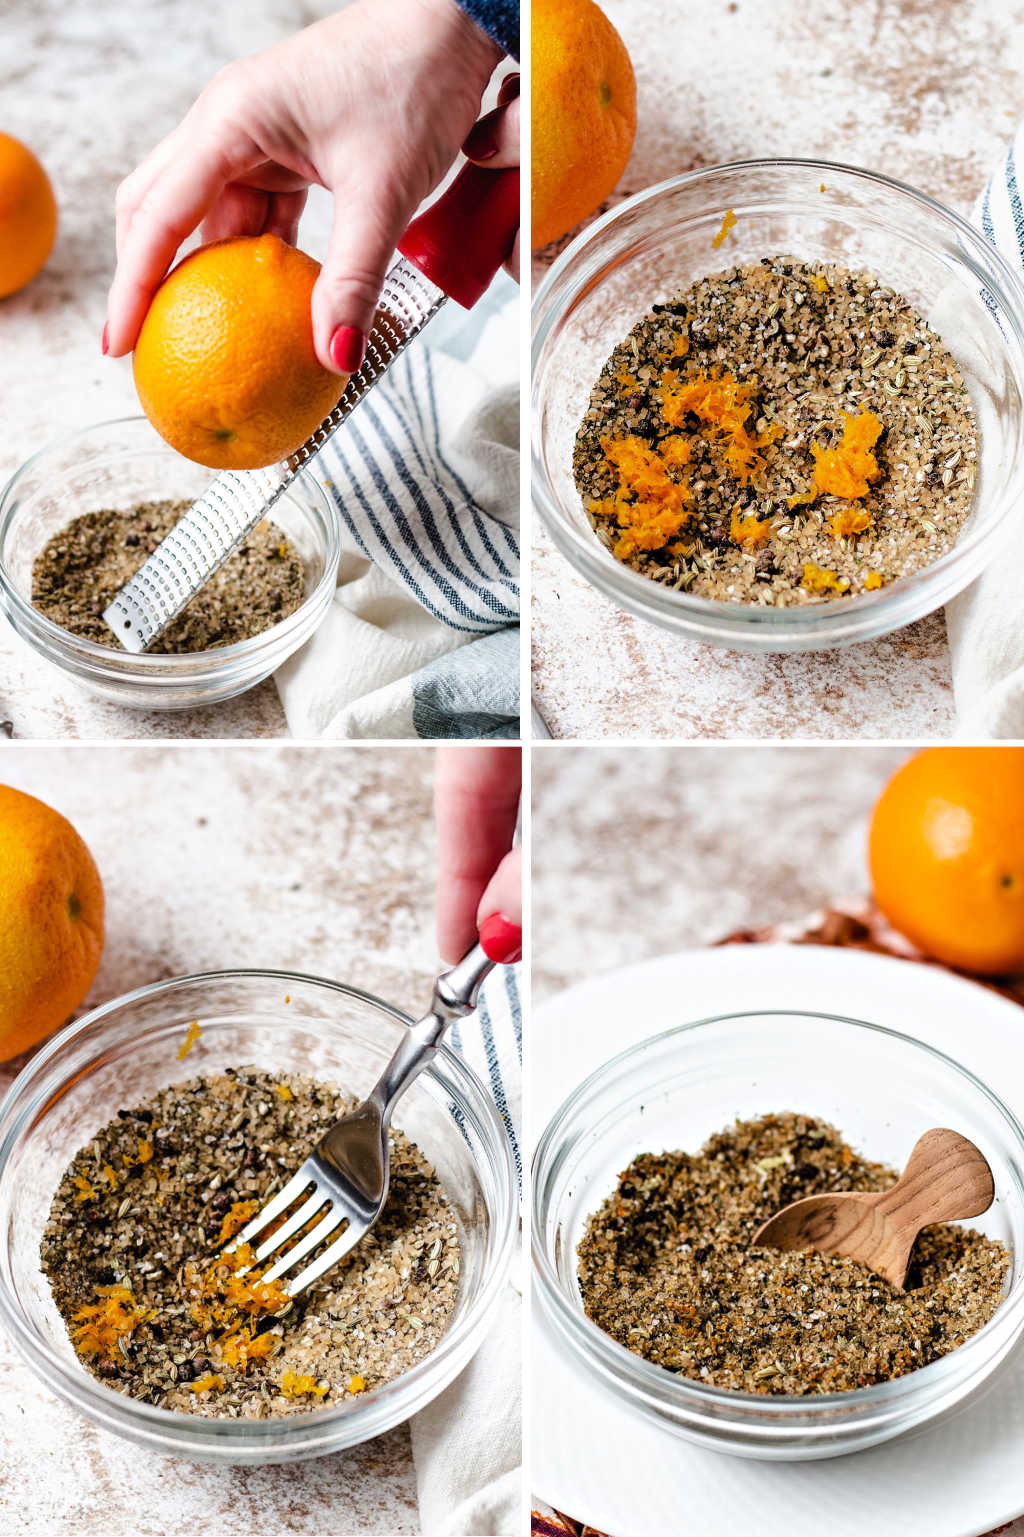 process steps for zesting an orange and stirring it into crushed spices for citrusy salmon rub.